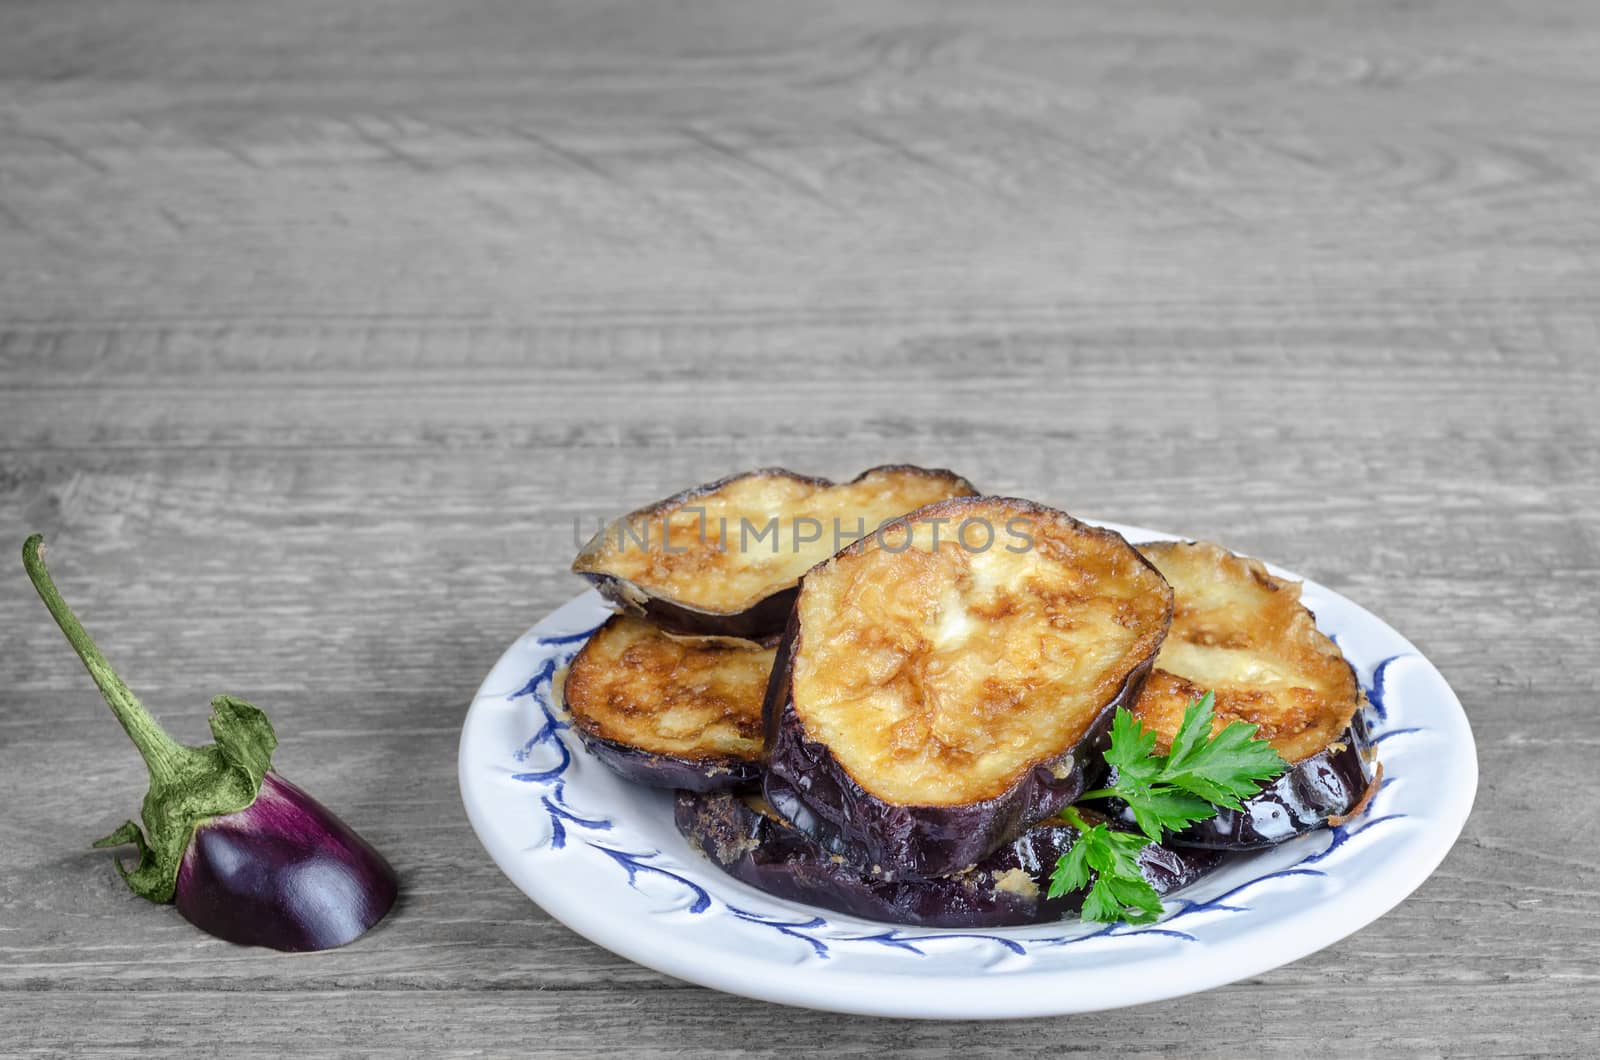 Fried eggplant on a white plate and grey wooden rustic background.